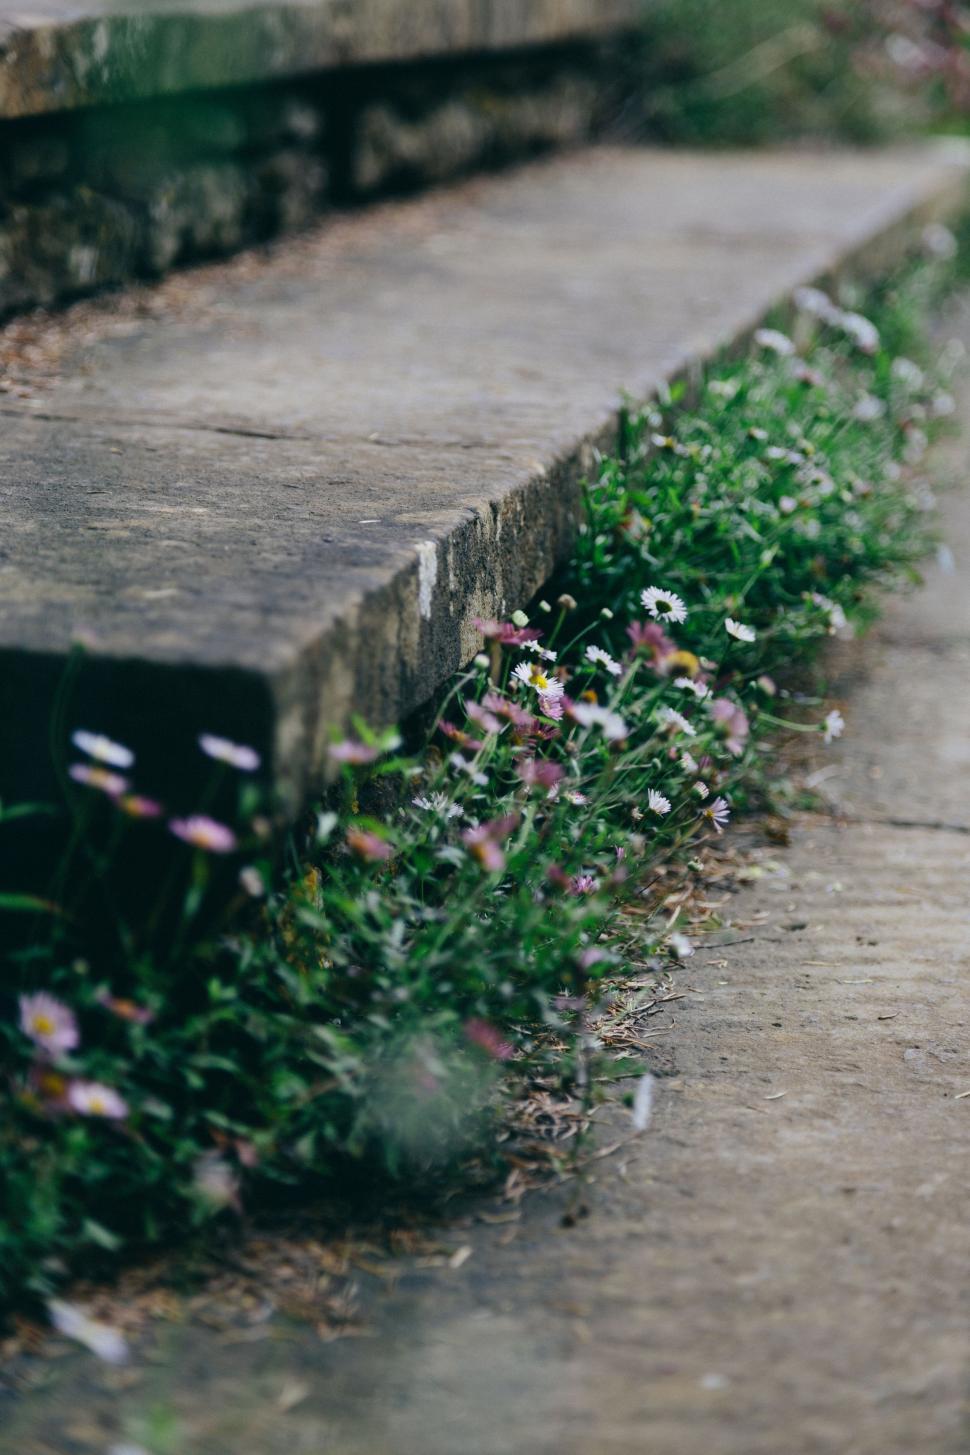 Free Image of Grass and Flowers on Concrete Stairs 